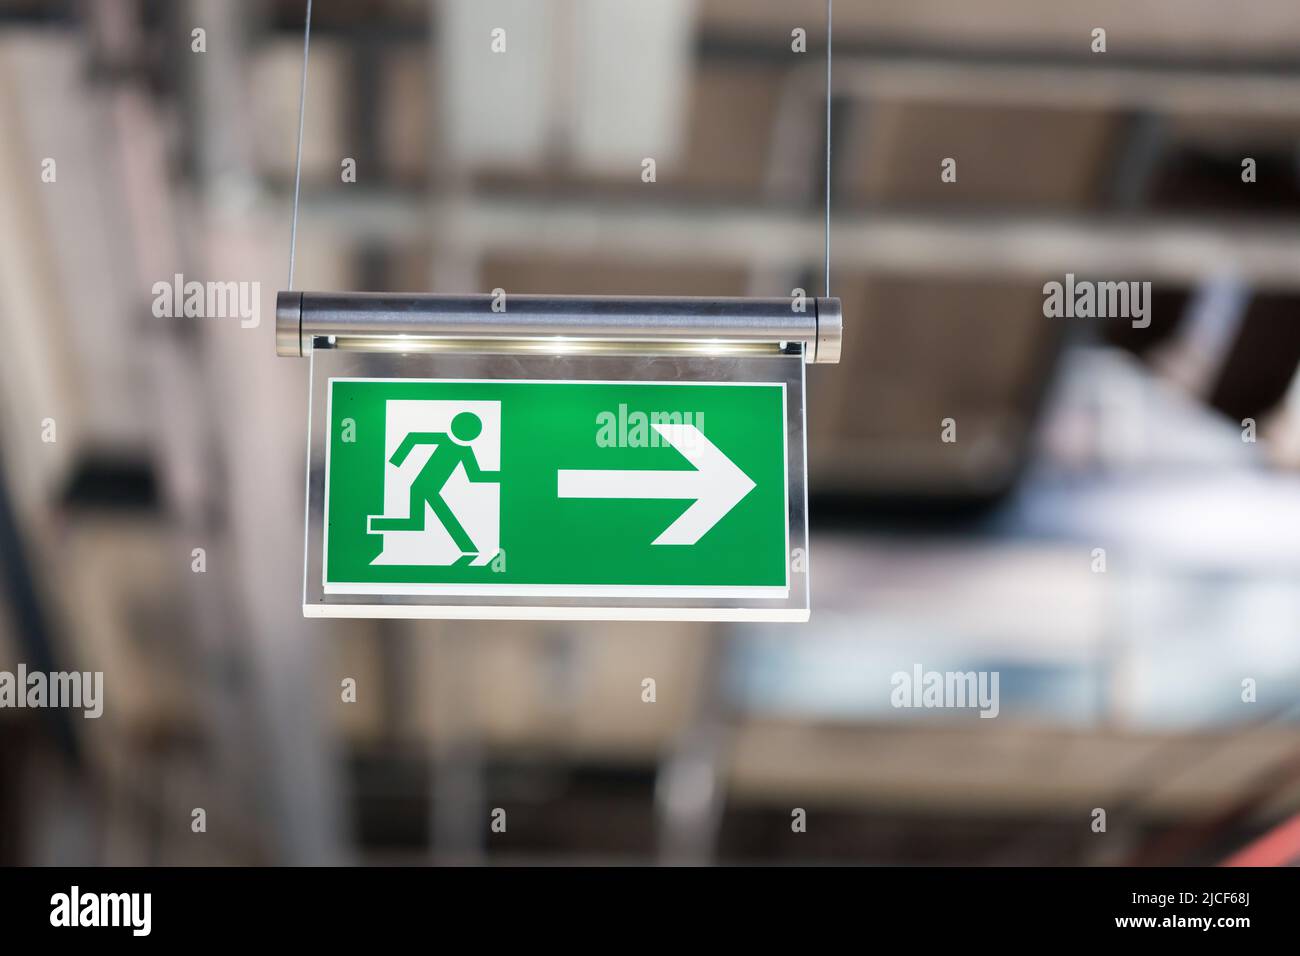 Essen, Germany - Mar 26, 2022: Illuminated emergency exit sign, hanging from the ceiling. With running figure and an arrow which points to the right. Stock Photo